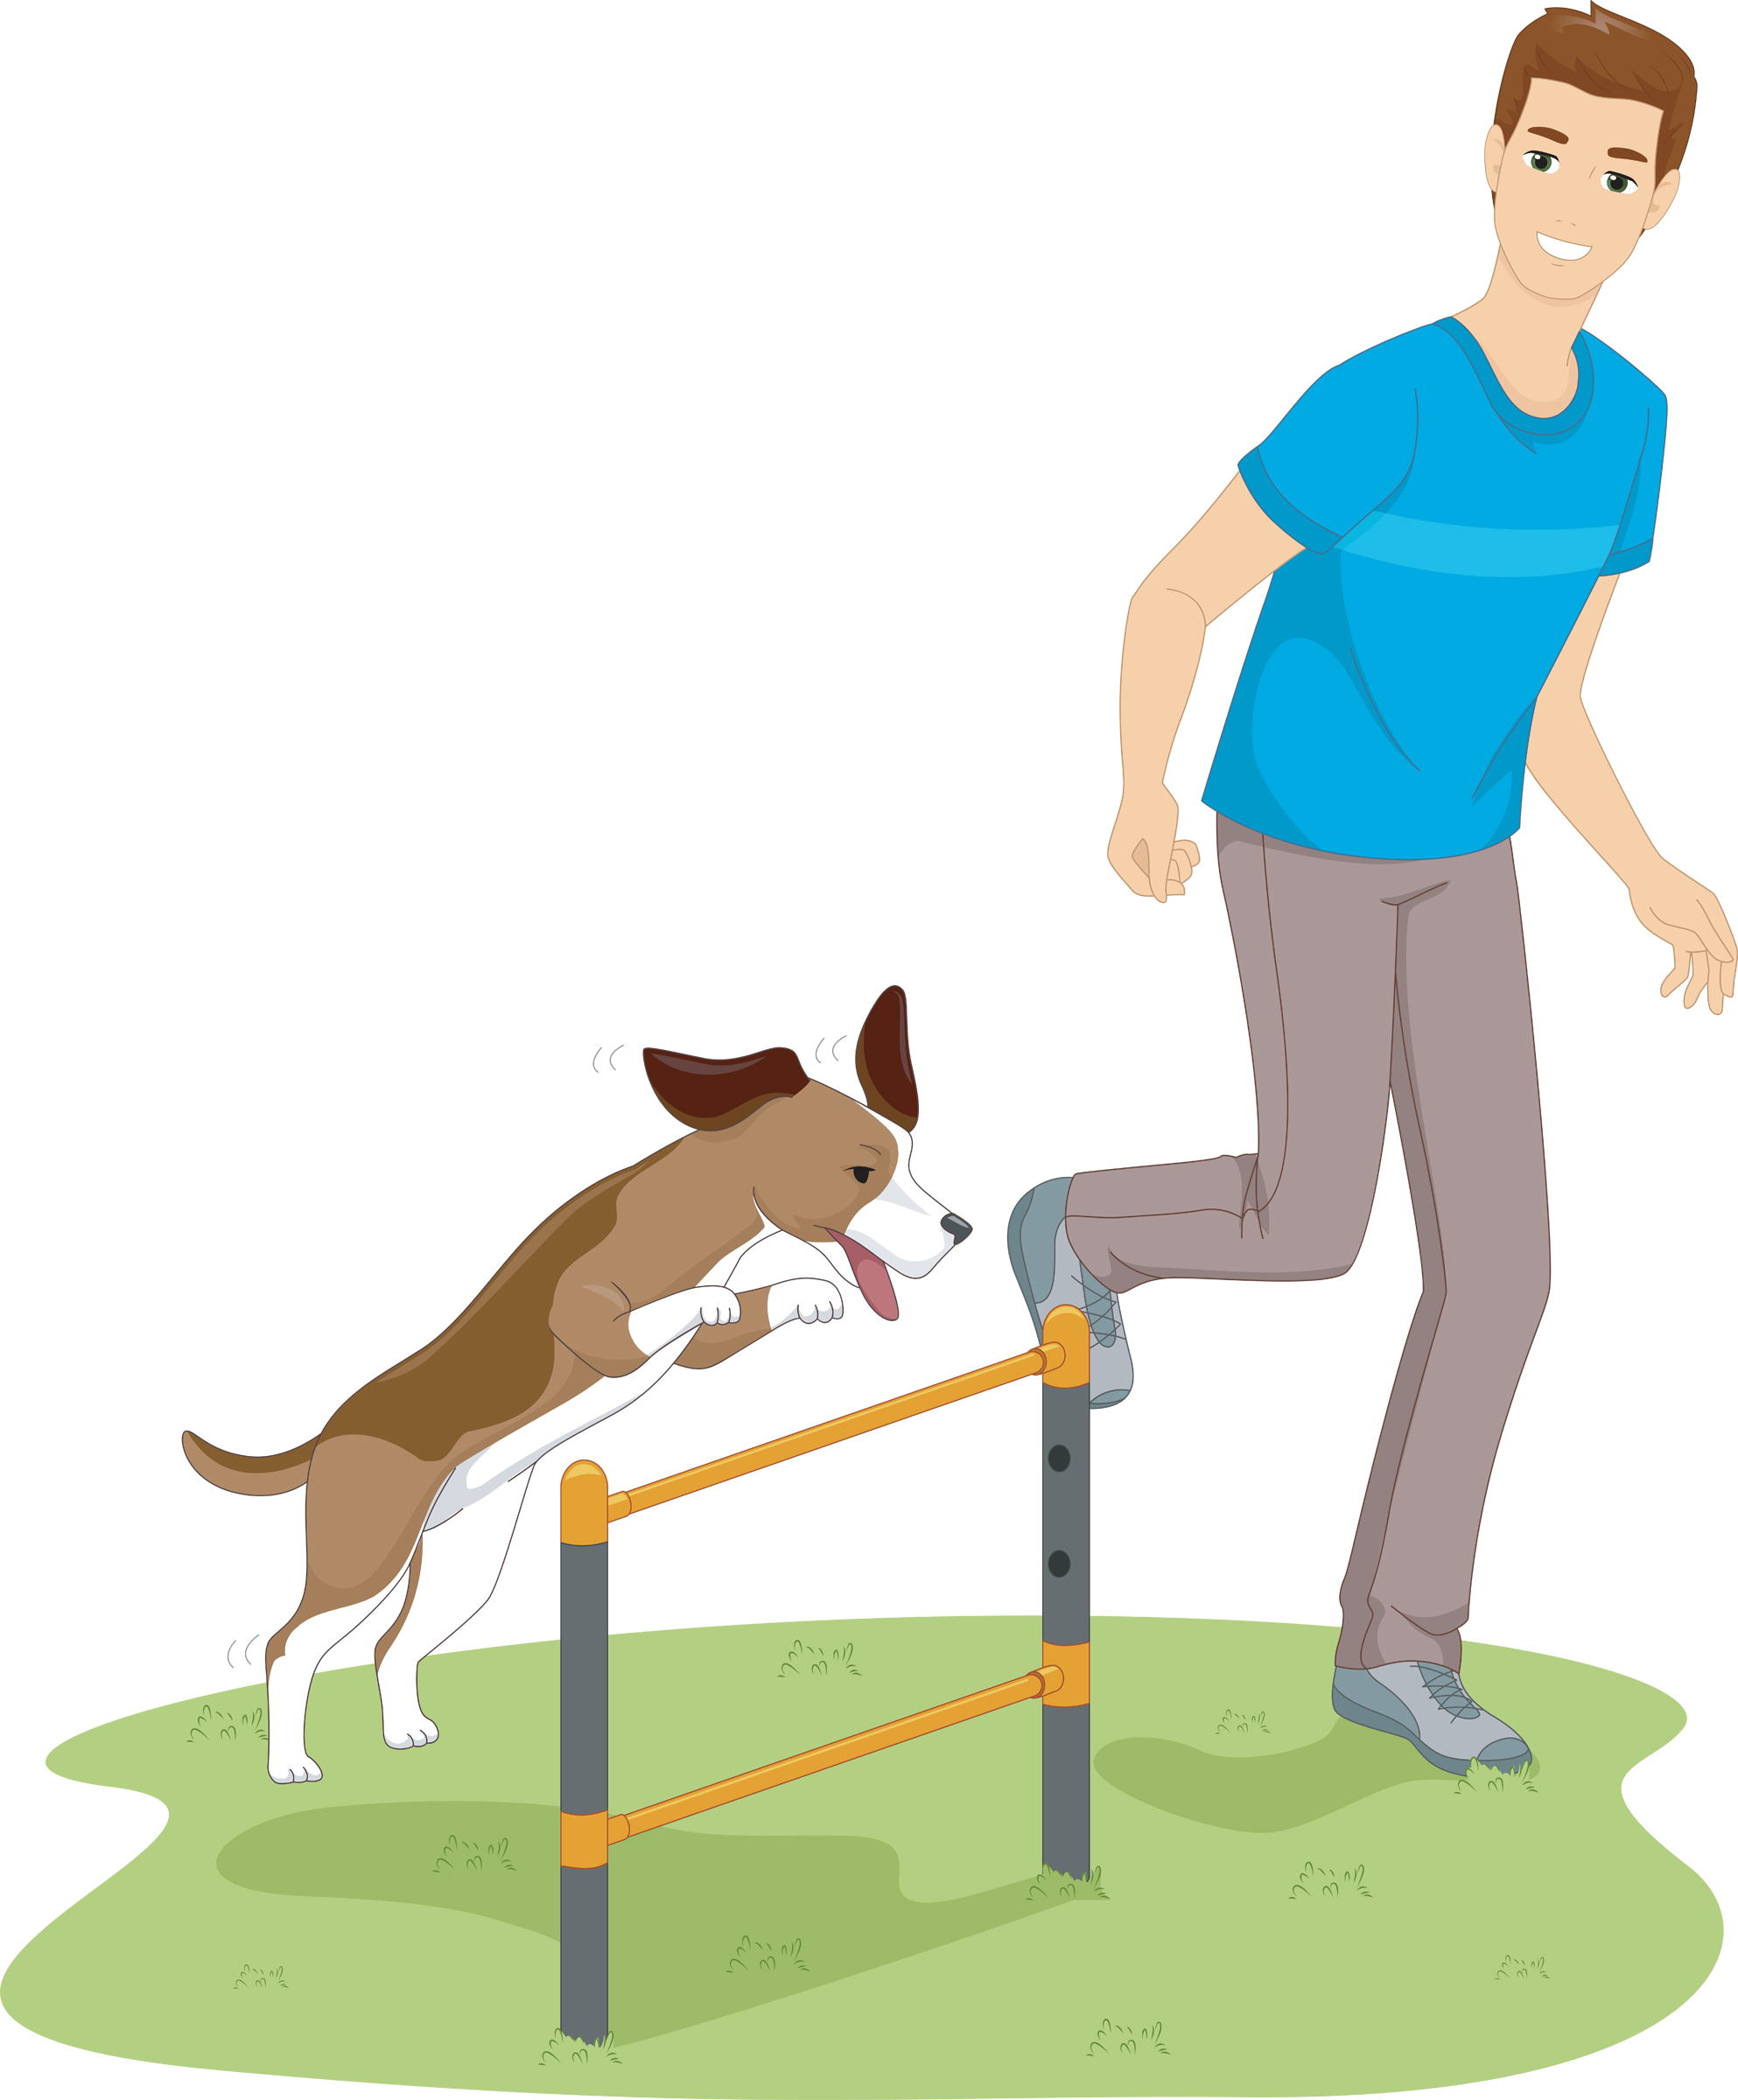 how to properly implement gentle dog training techniques